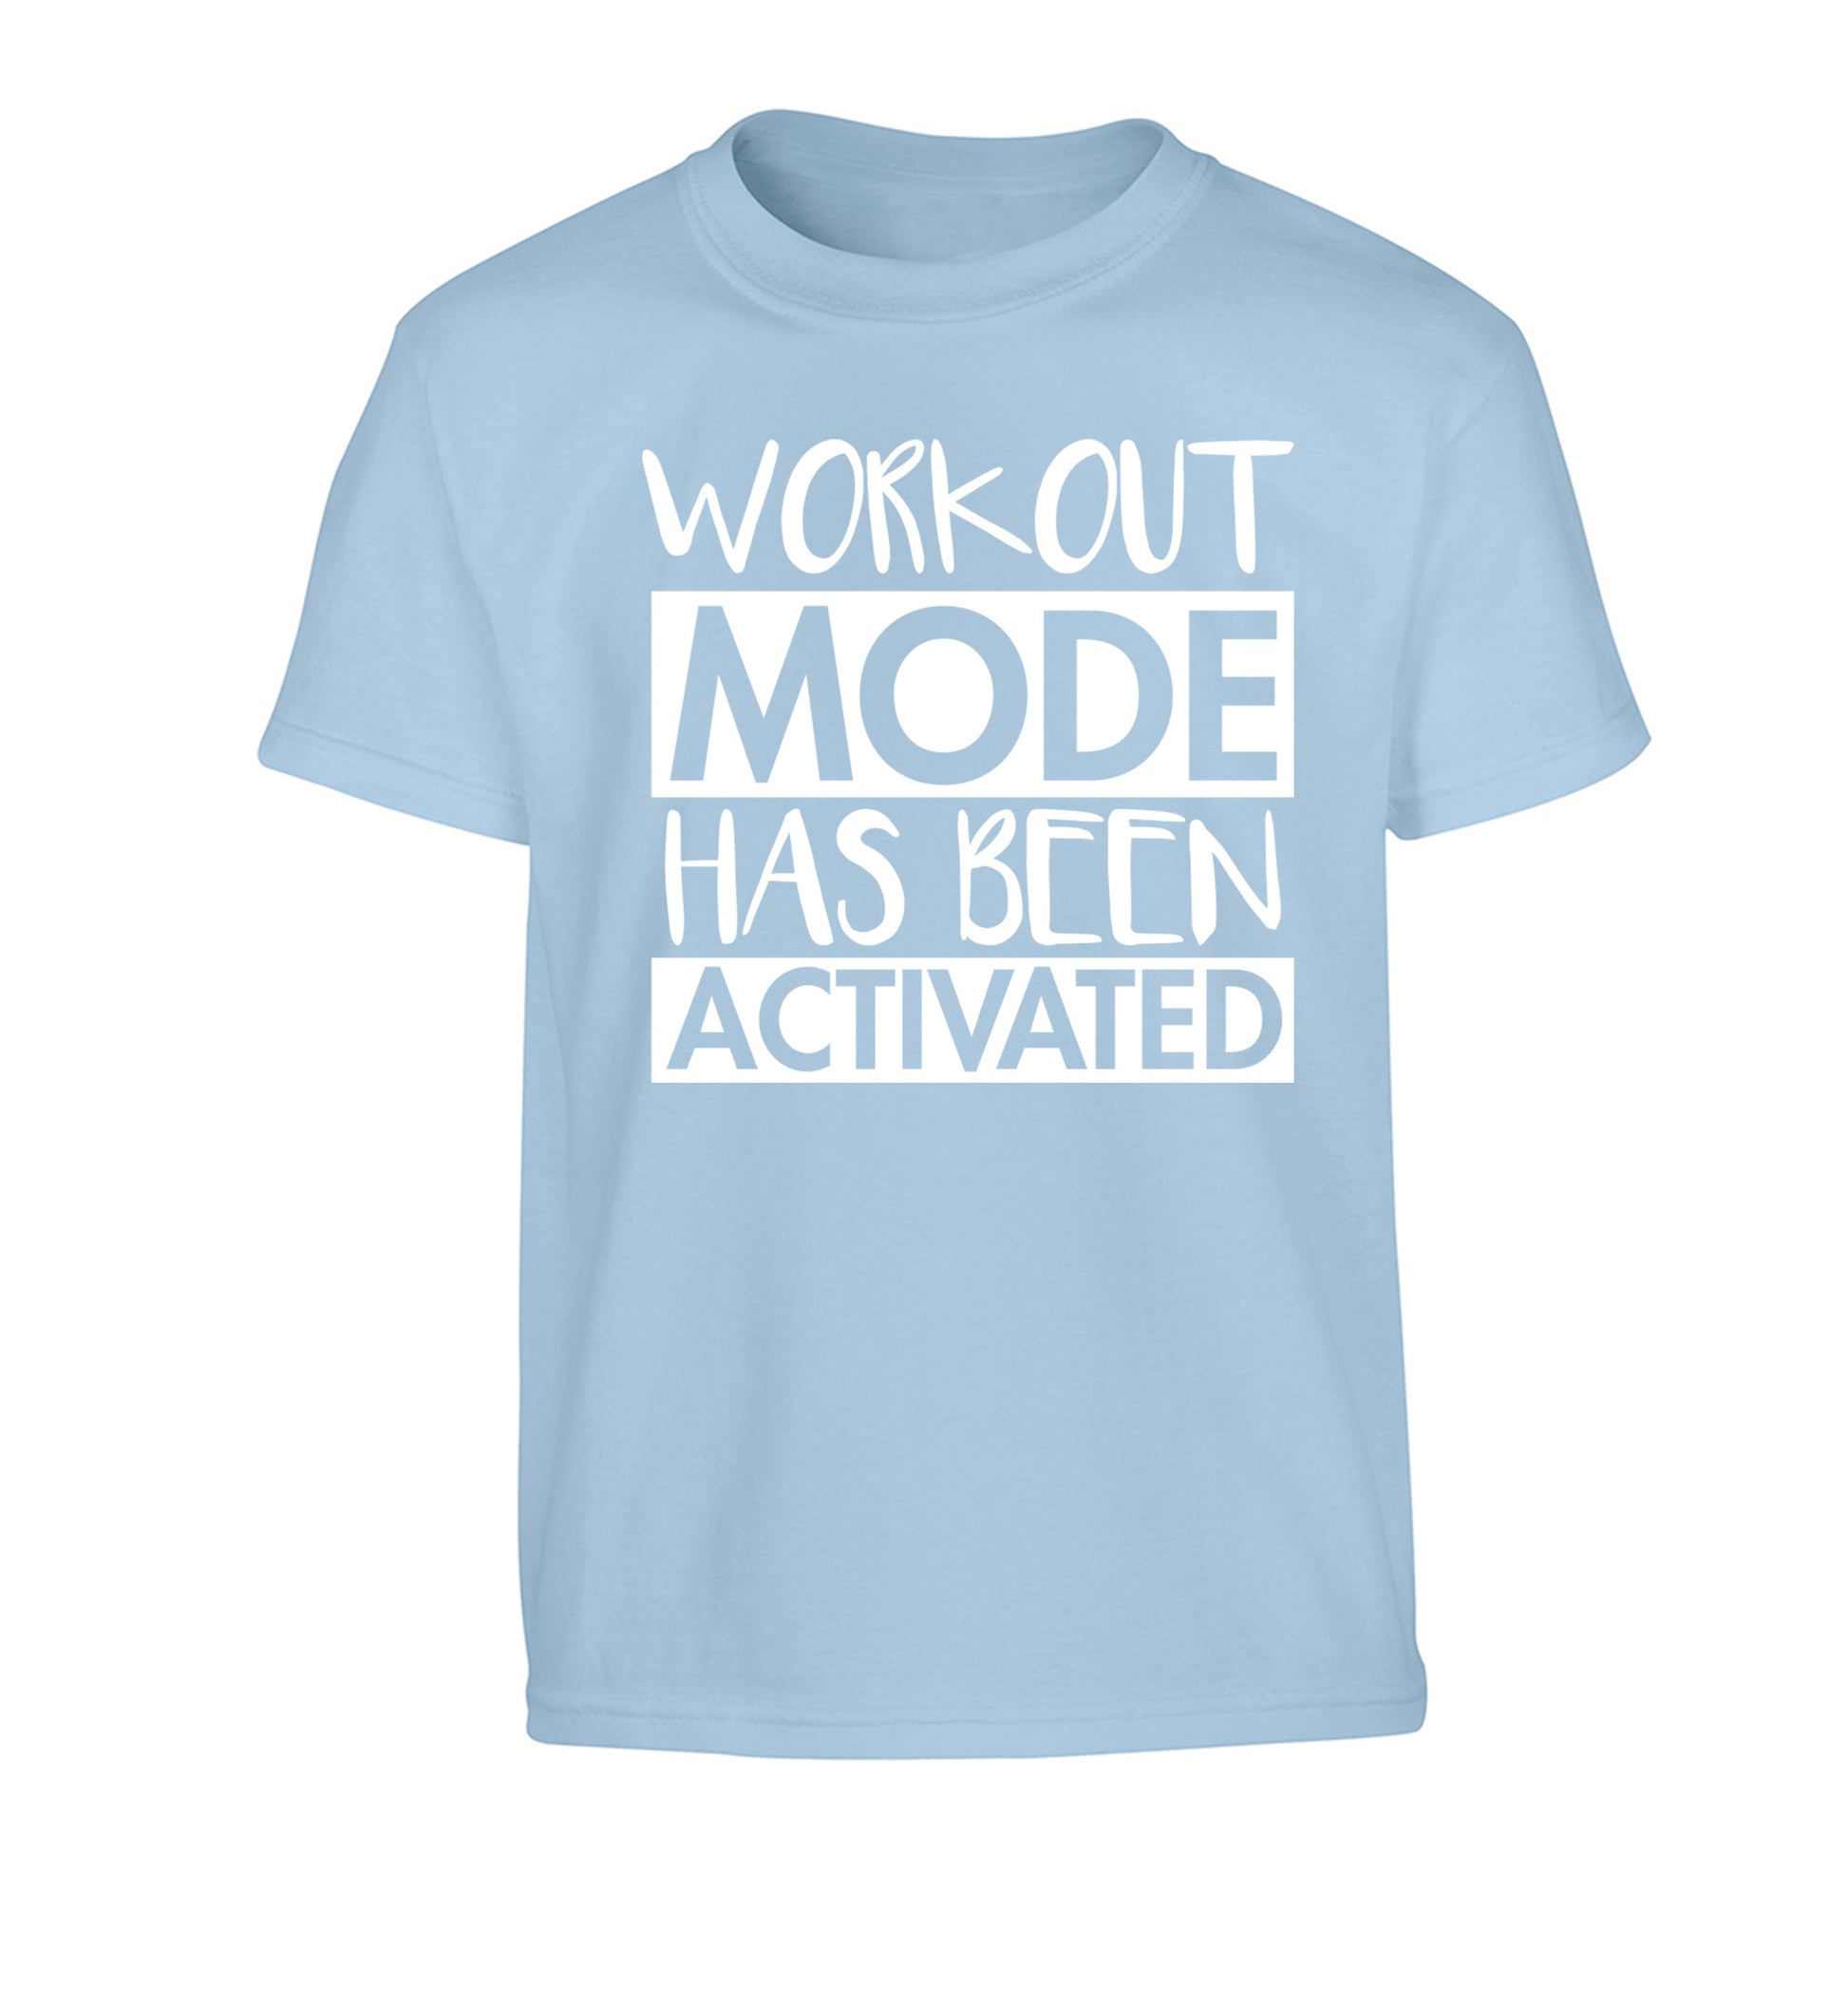 Workout mode has been activated Children's light blue Tshirt 12-14 Years